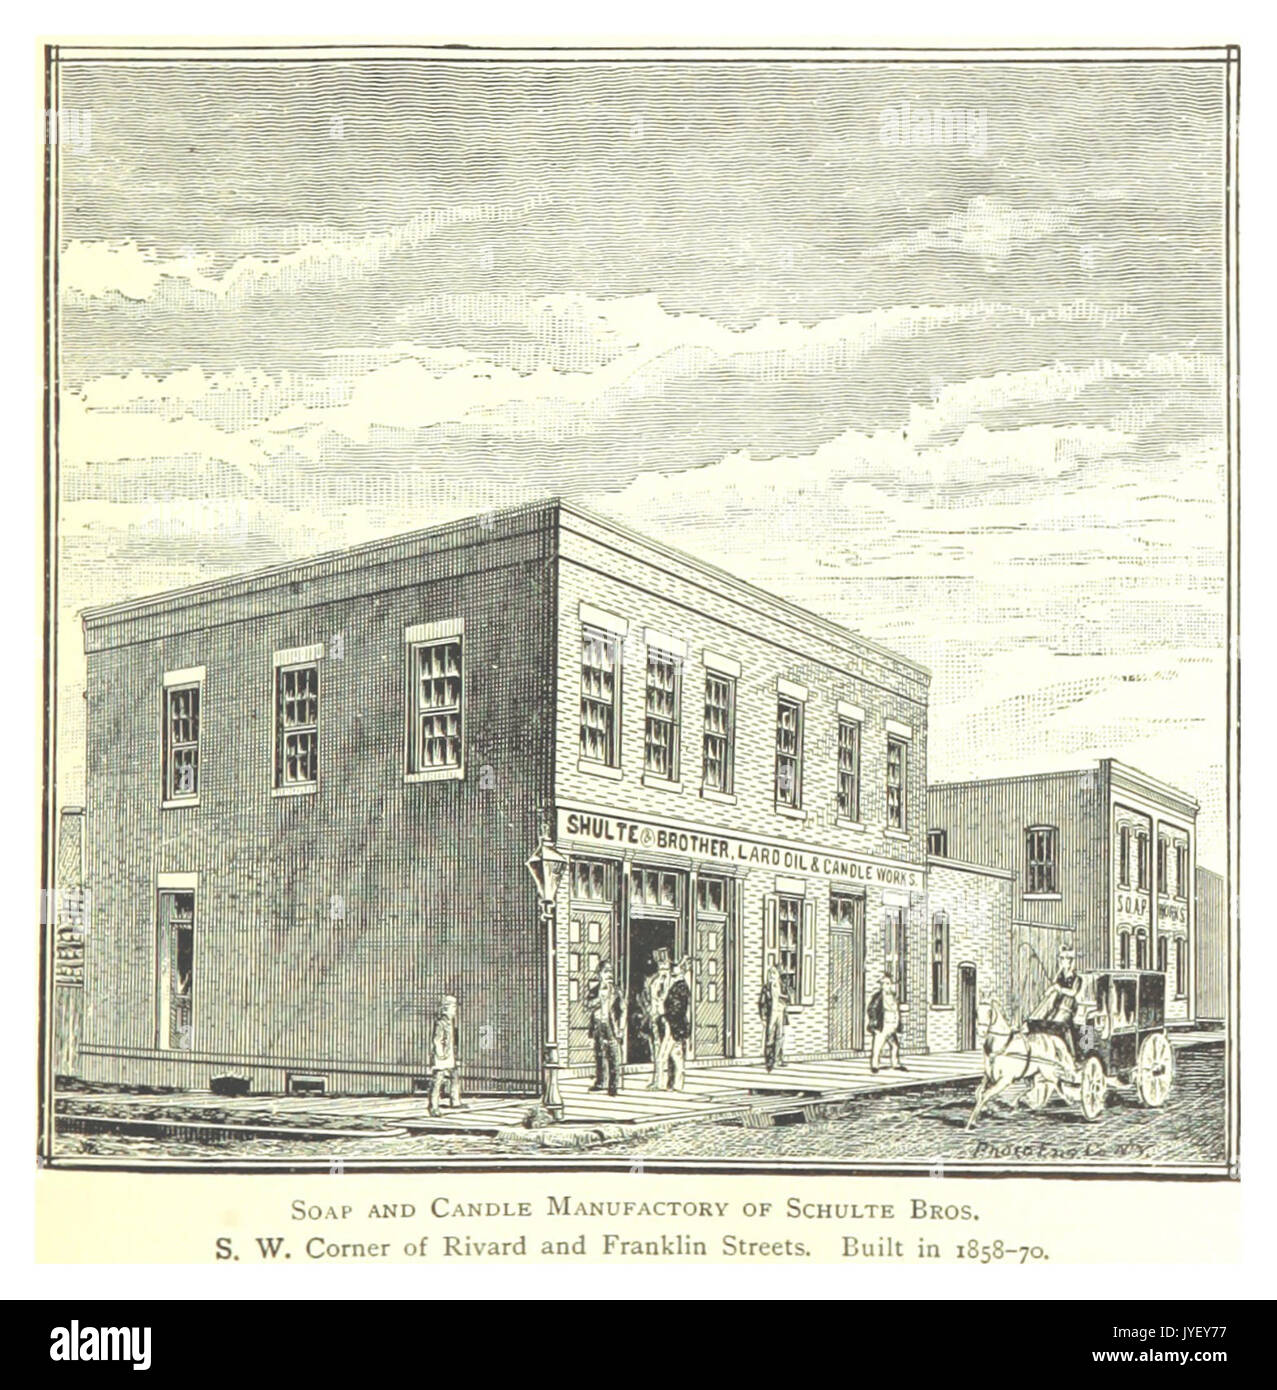 FARMER(1884) Detroit, p877 SOAP AND CANDLE MANUFACTORY OF SCHULTE BROS. S.W. CORNER OF RIVARD AND FRANKLIN STREETS. BUILT IN 1858 70 Stock Photo